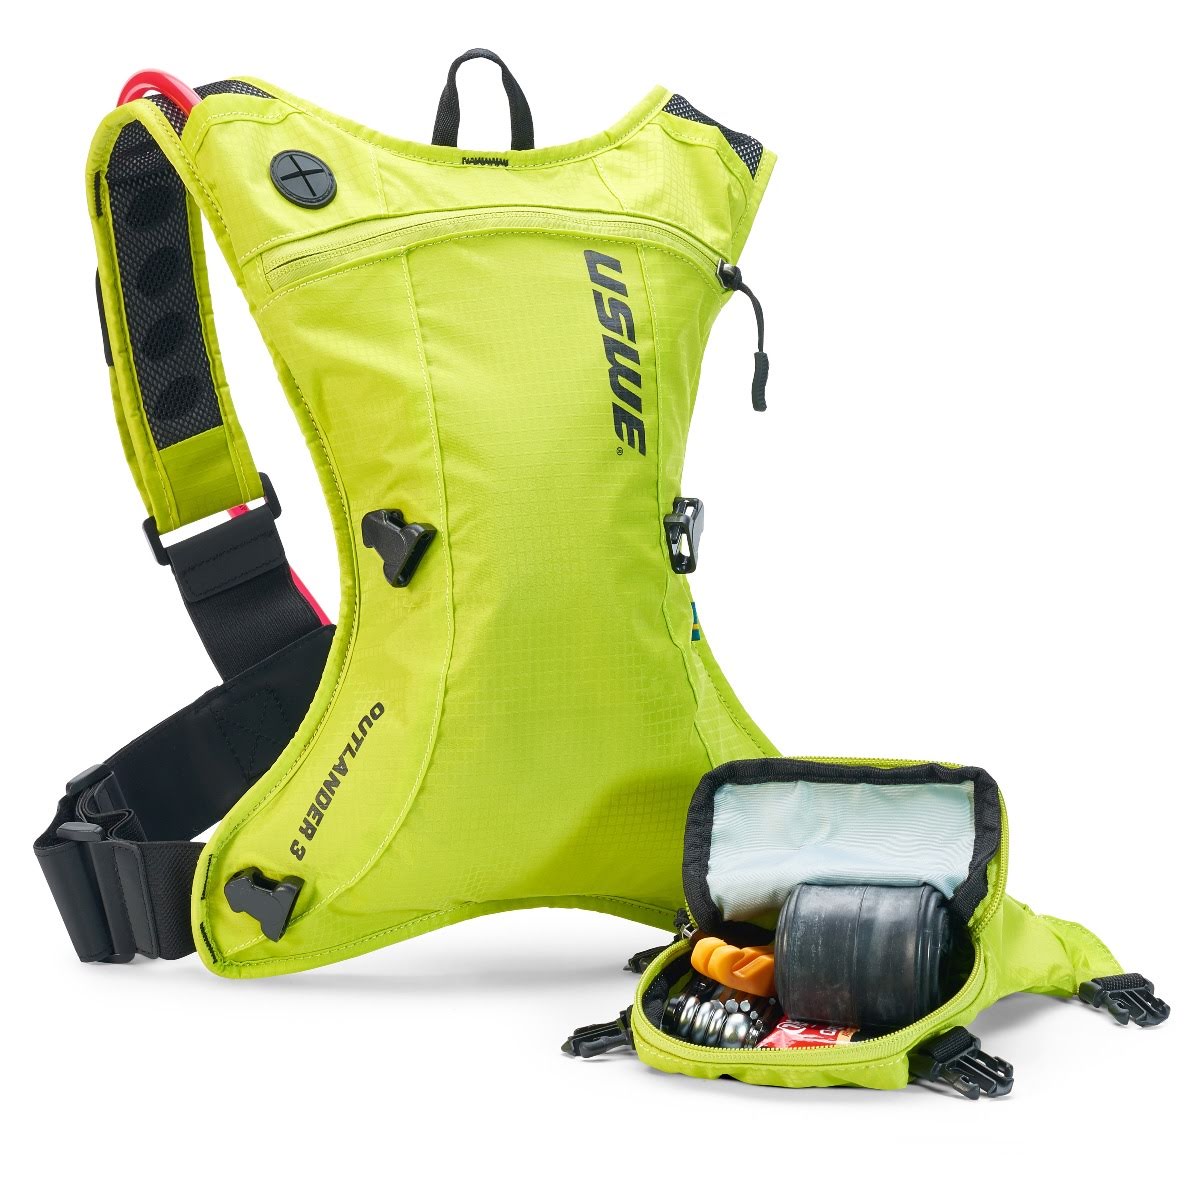 USWE Outlander 3 Hydration Backpack Crazy Yellow – With 1.5 Litre Bladder